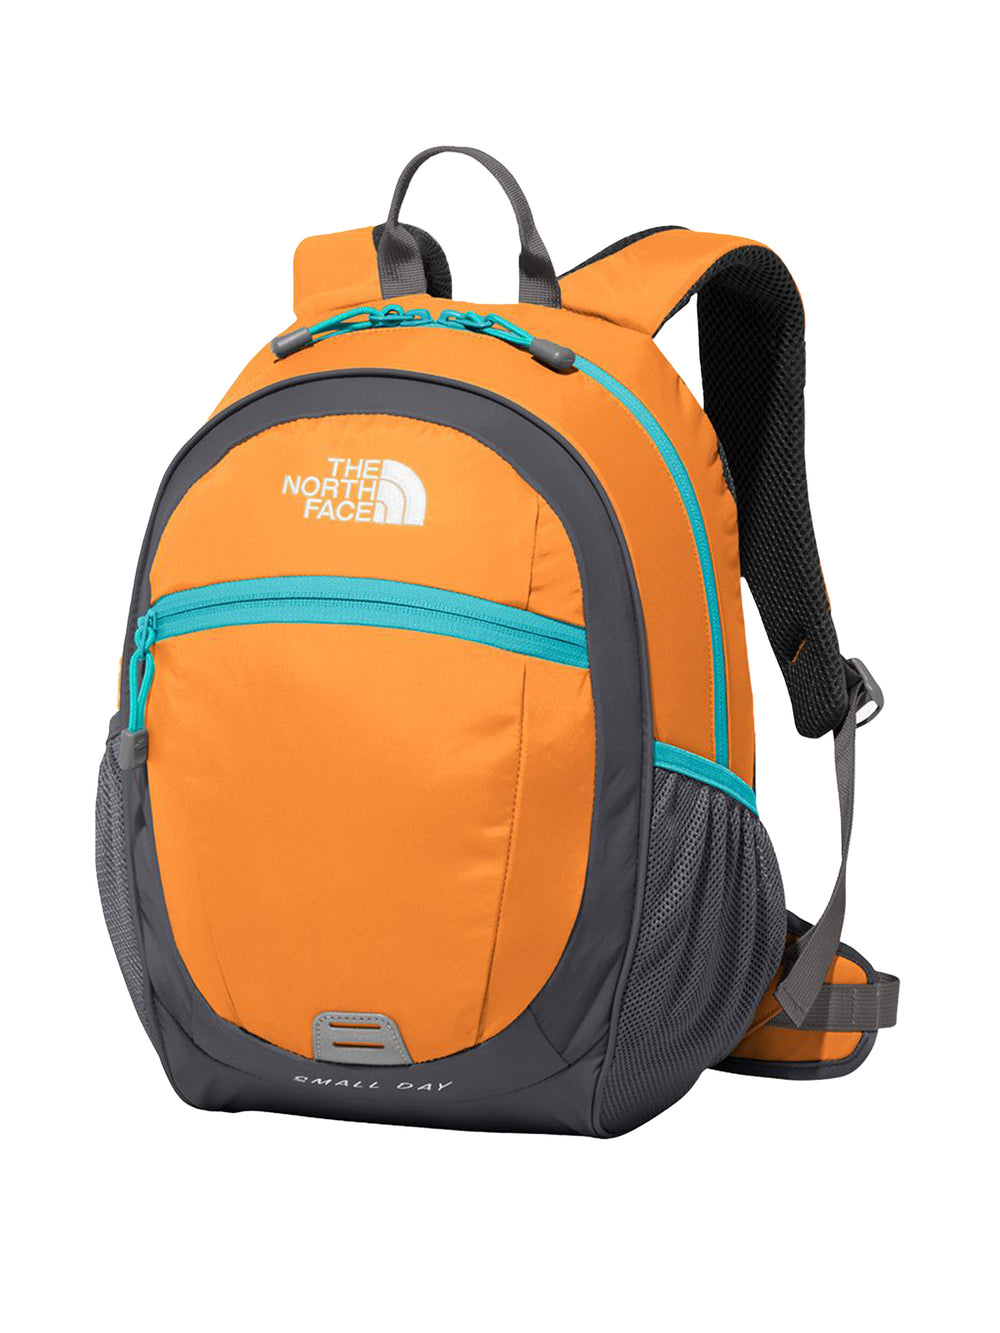 [Sold Out No Restock][THE NORTH FACE] Kids Small Day Backpack The North Face Kids Outdoor Kids Rucksack Cute 23SS NMJ72312